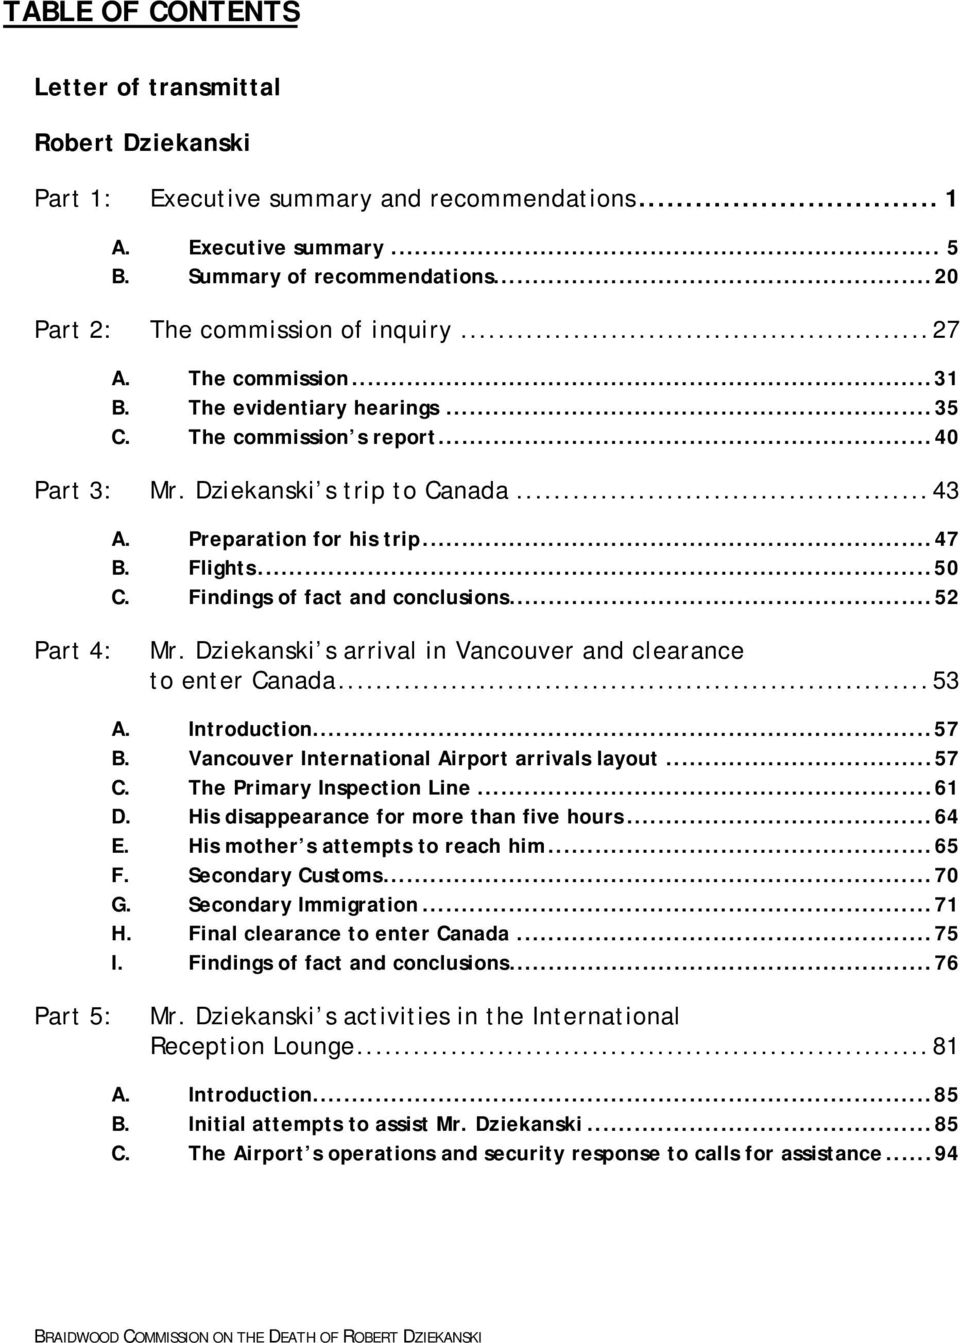 Preparation for his trip... 47 B. Flights... 50 C. Findings of fact and conclusions... 52 Part 4: Mr. Dziekanski s arrival in Vancouver and clearance to enter Canada... 53 A. Introduction... 57 B.